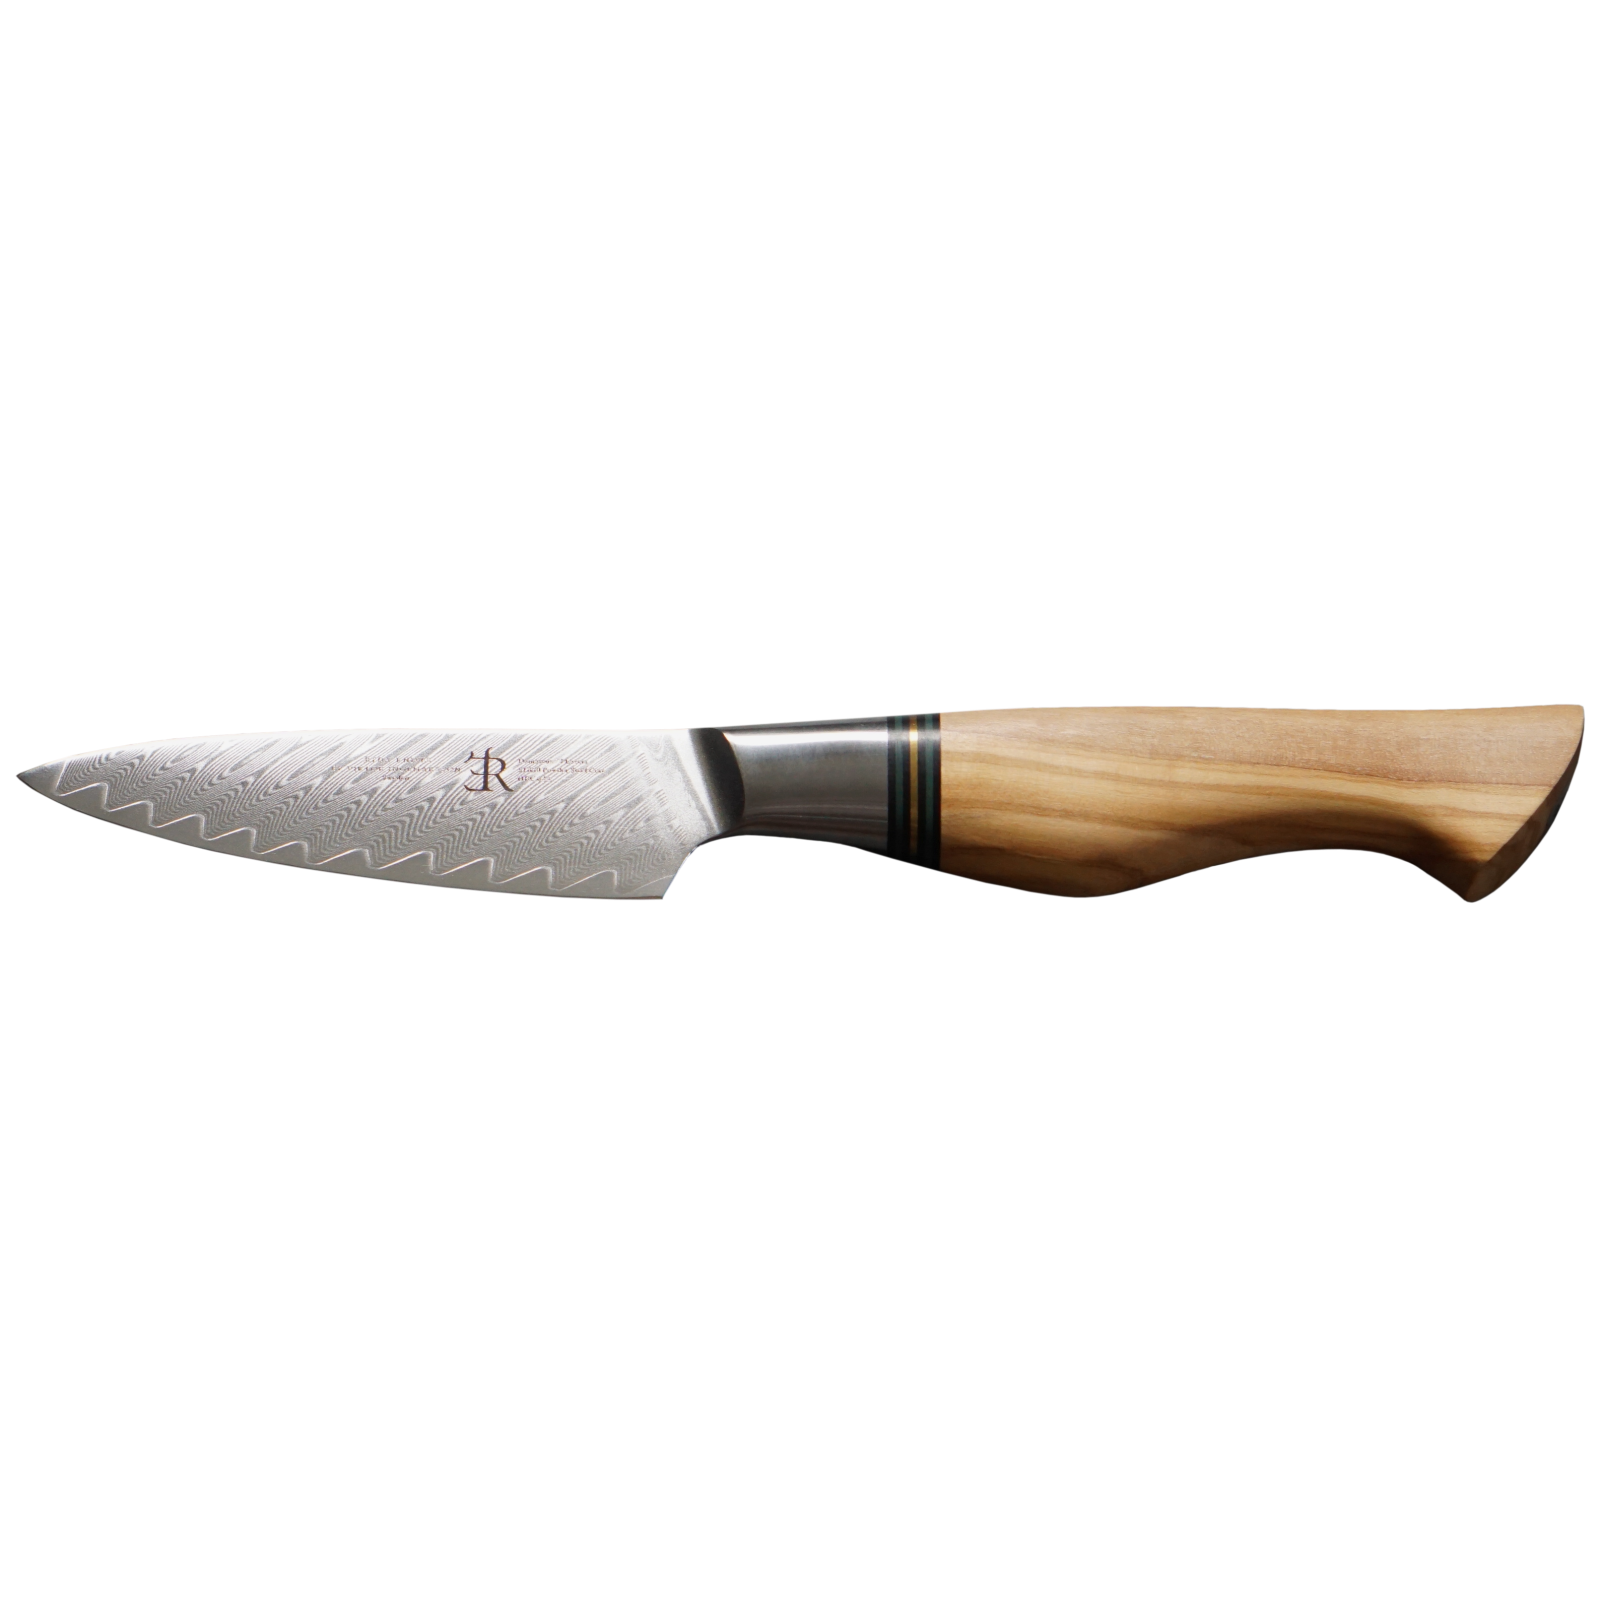 Parring knife ST650.png